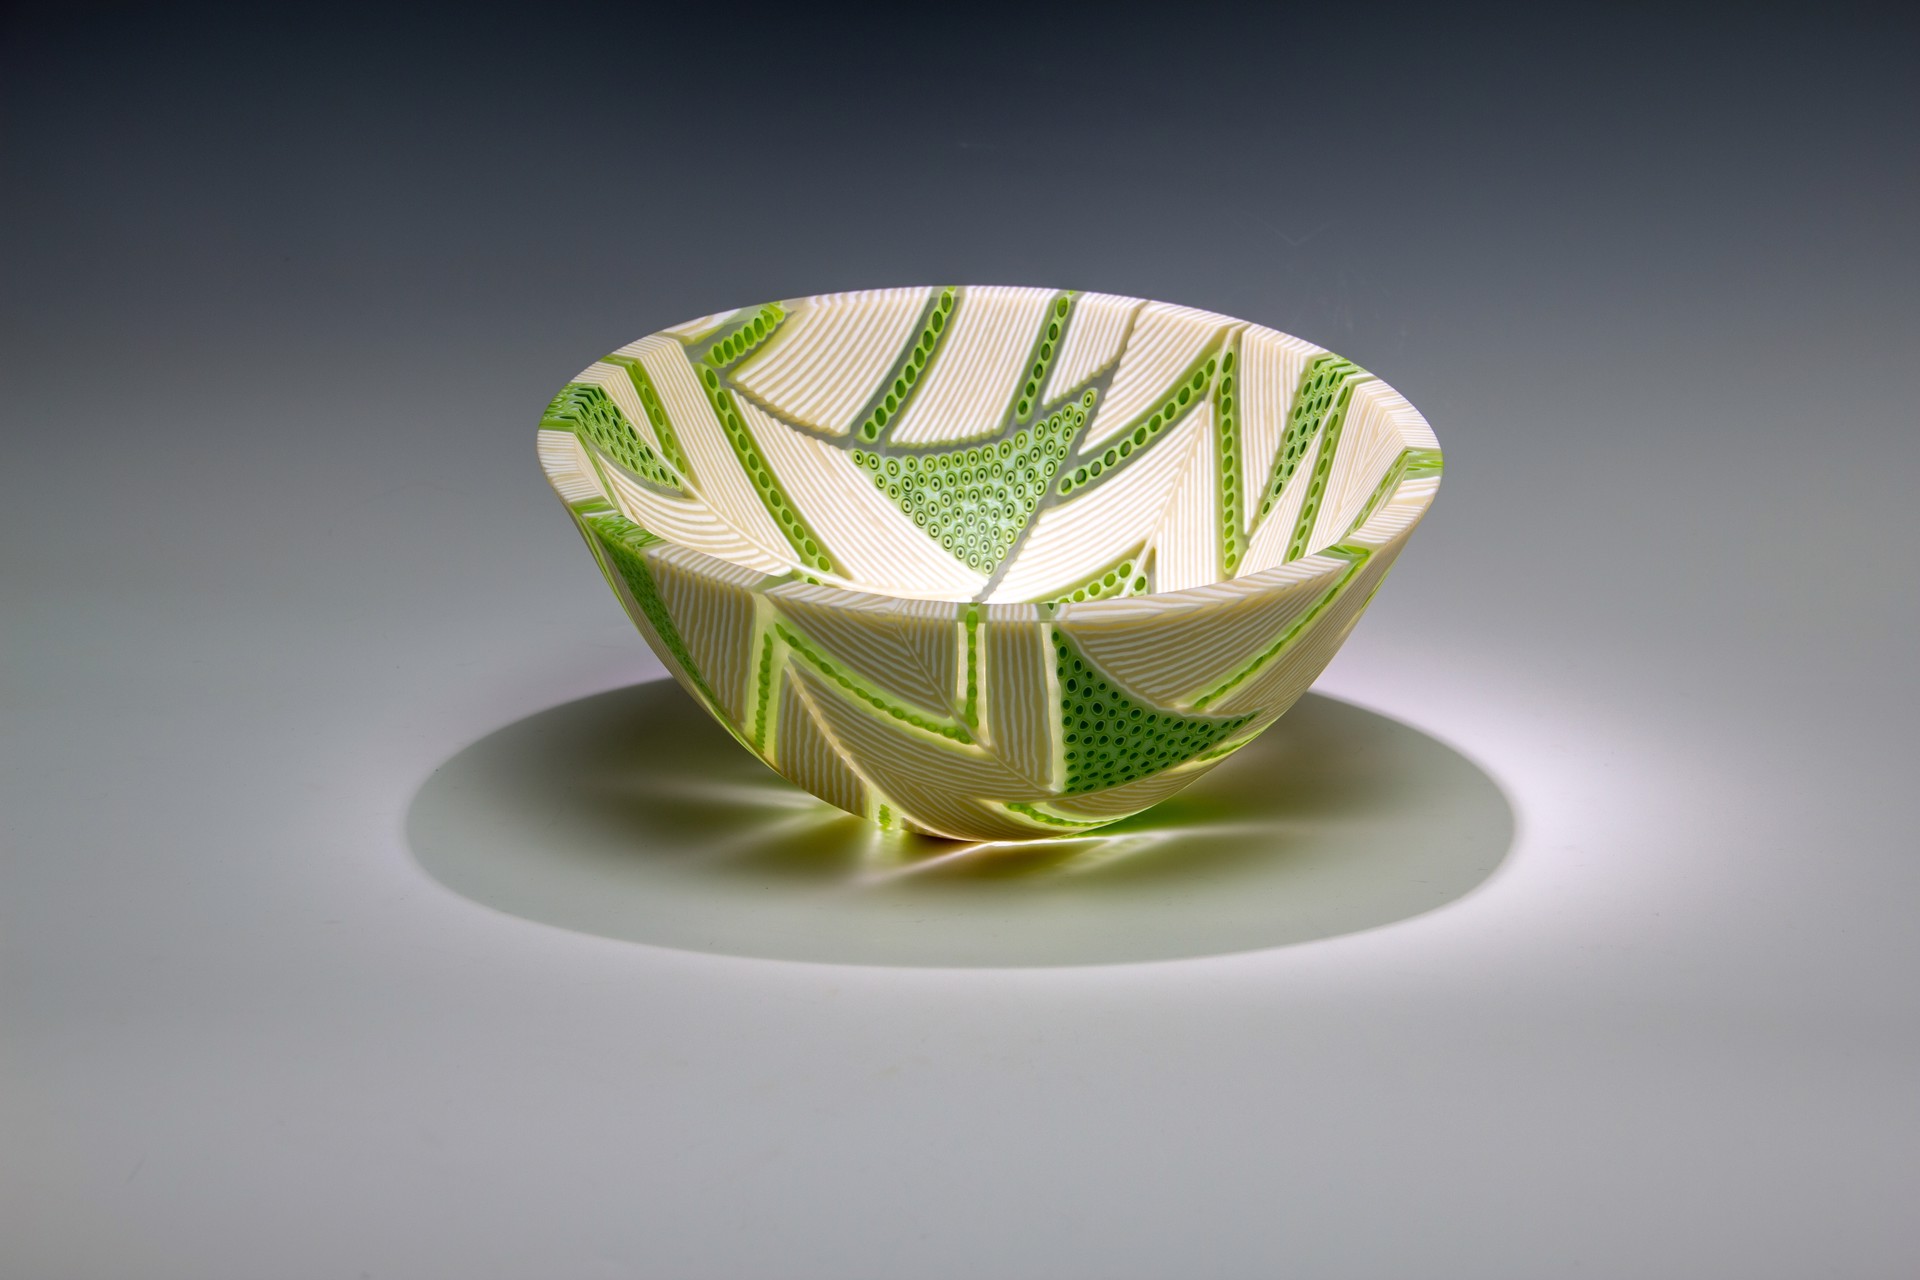 Arrows Series: Bright Green Deep Vessel by Patti and Dave Hegland